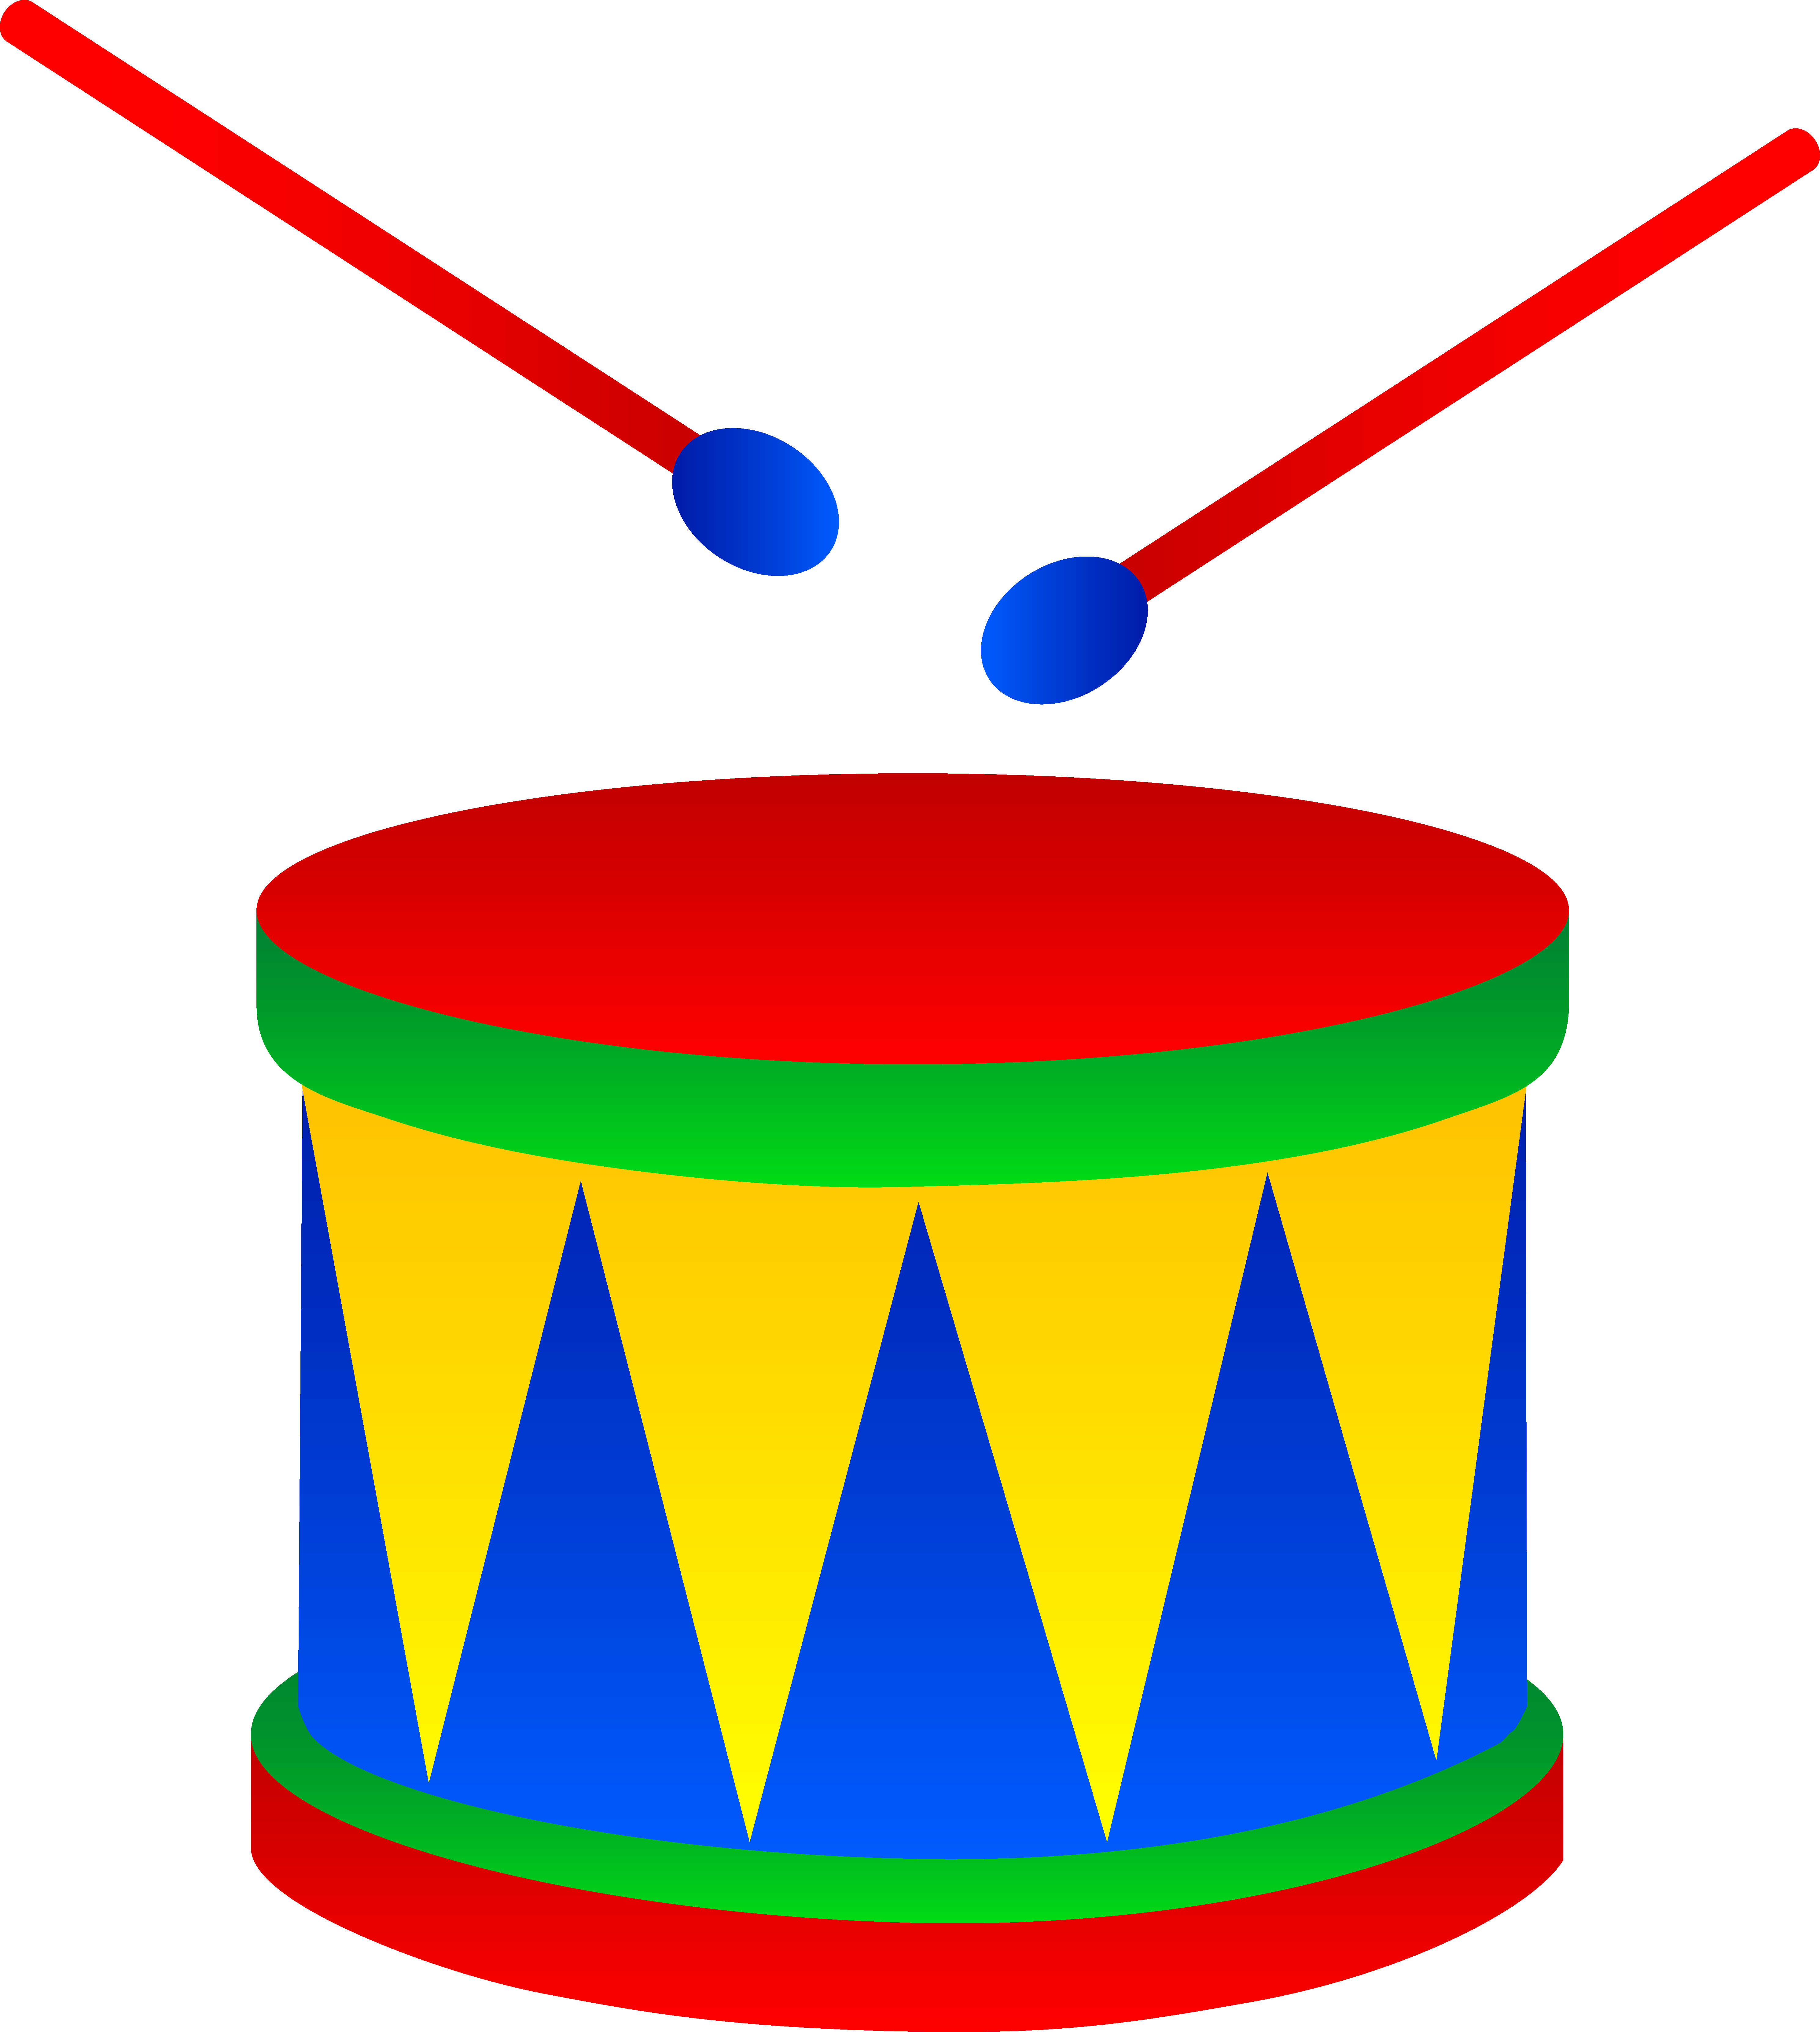 Marching Drum With Drumsticks - Free Clip Art